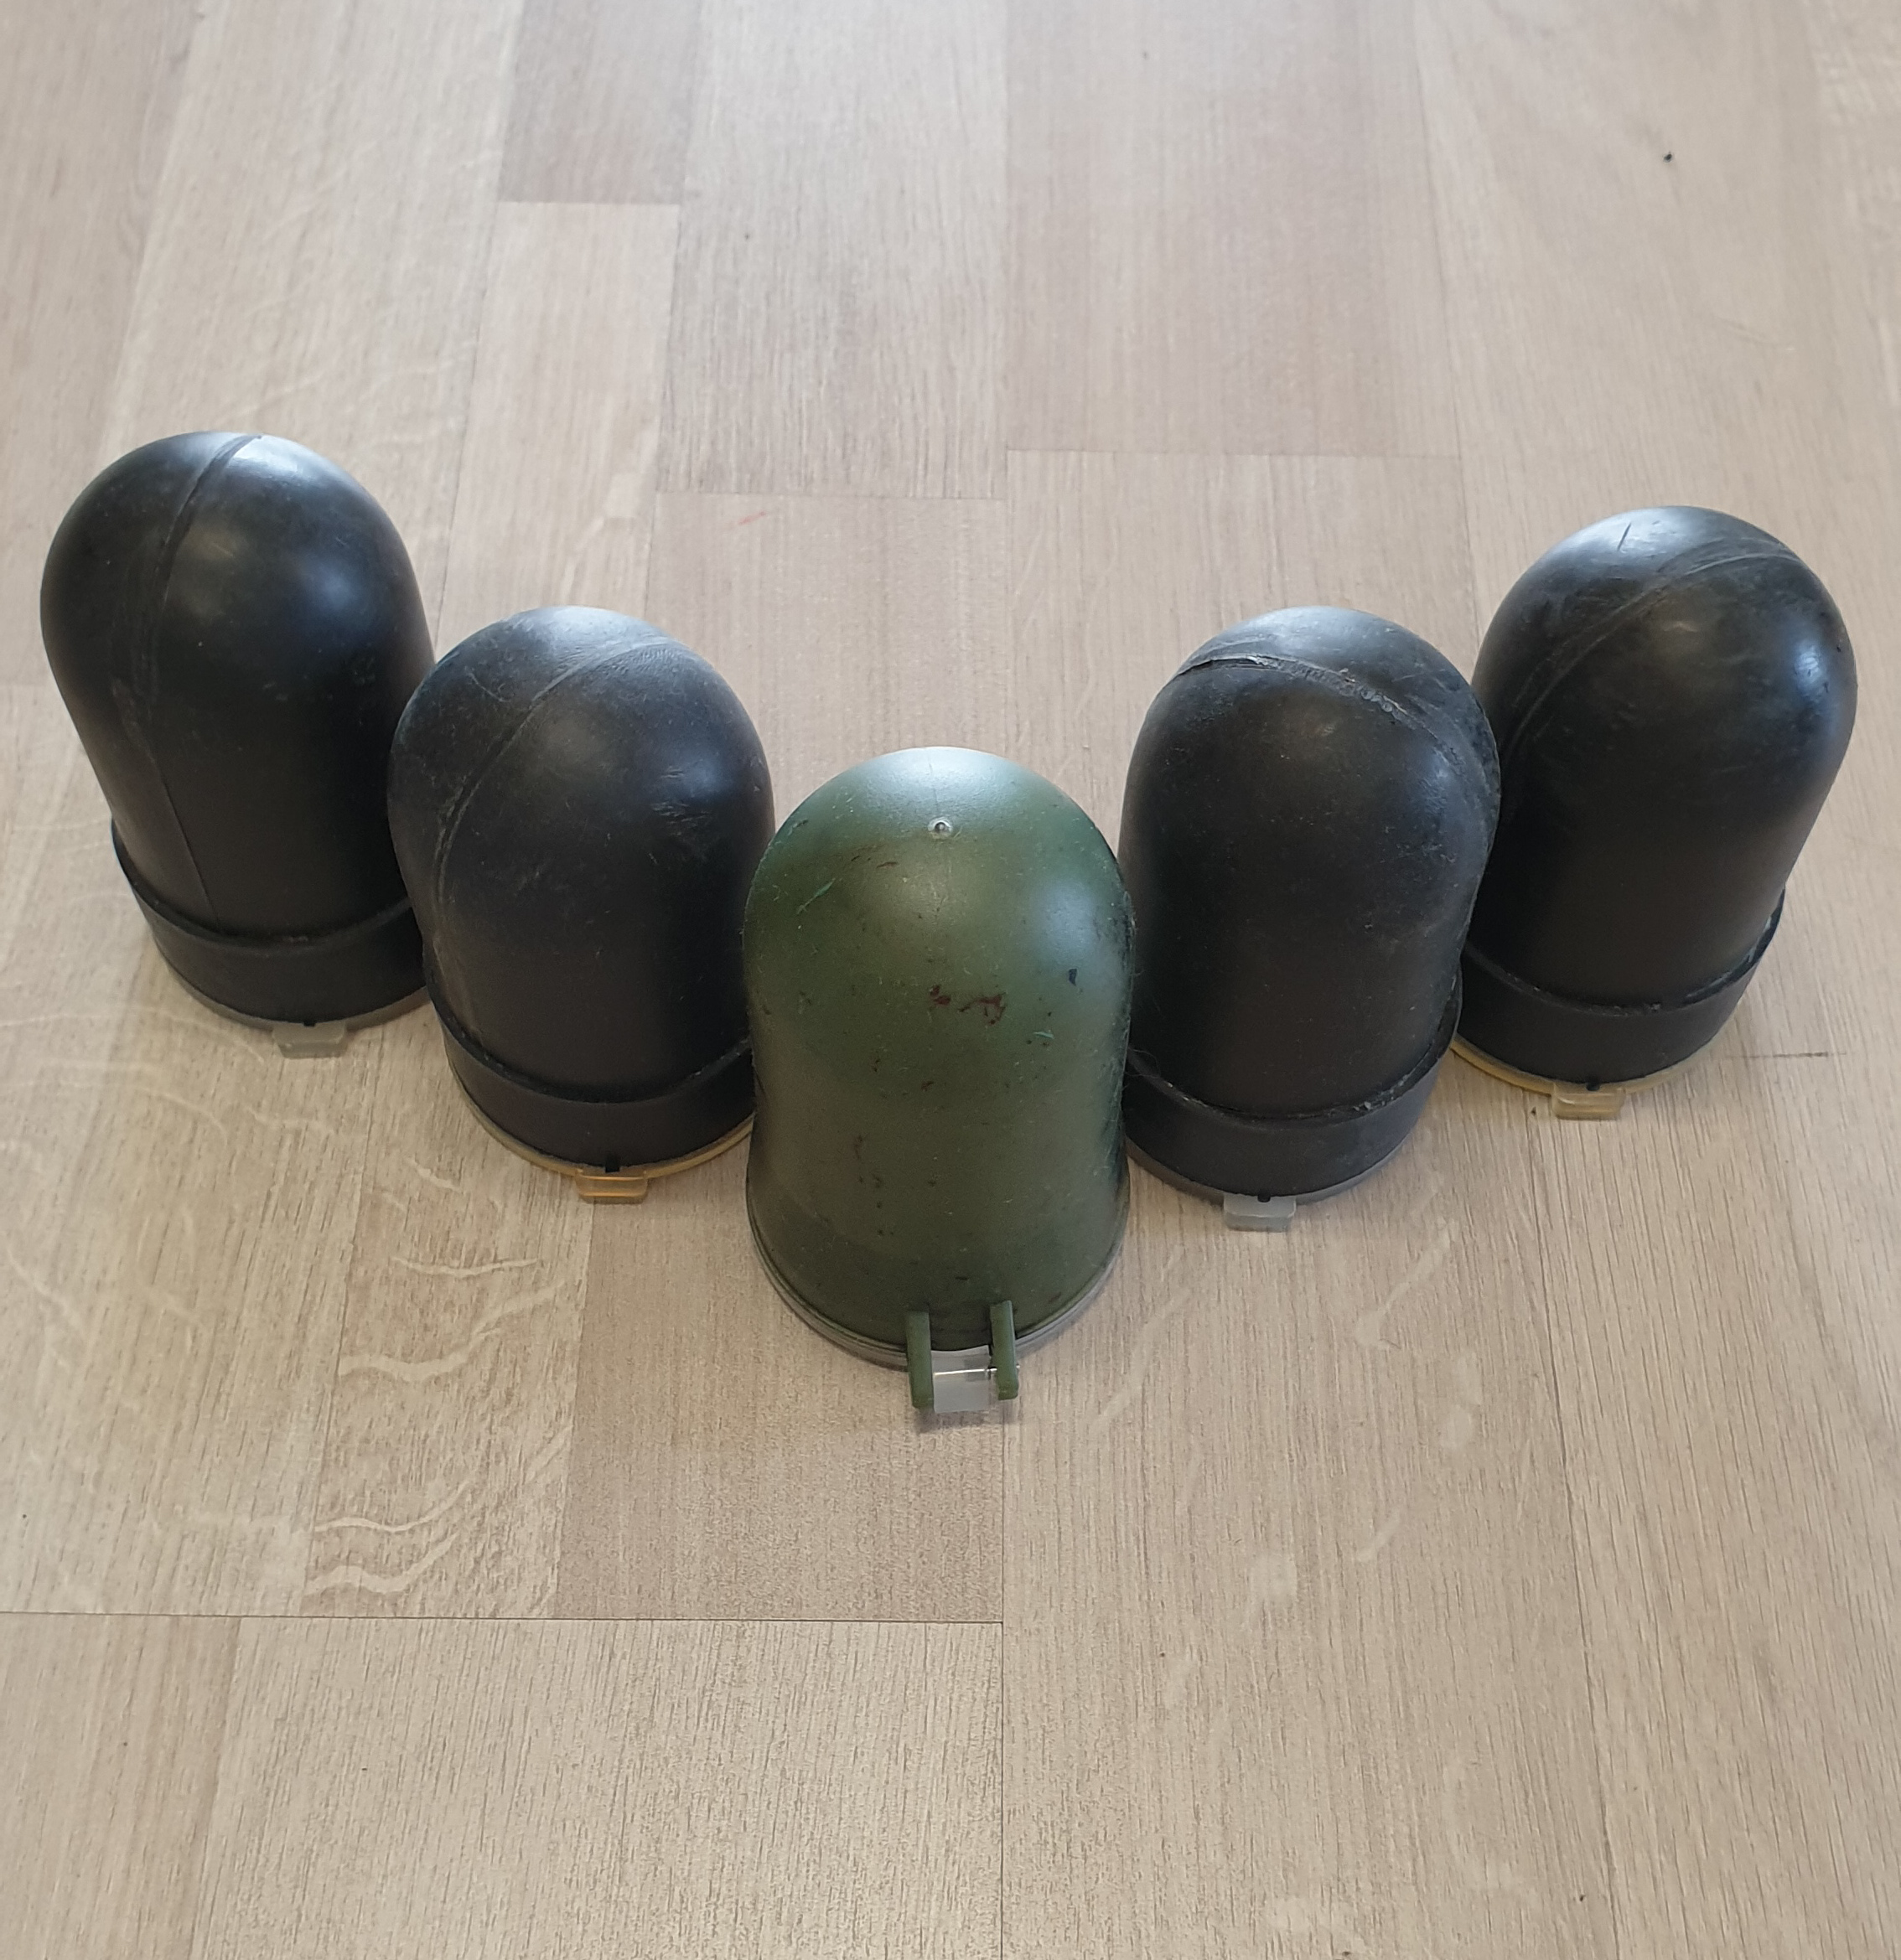 5x50rd Pods - USED